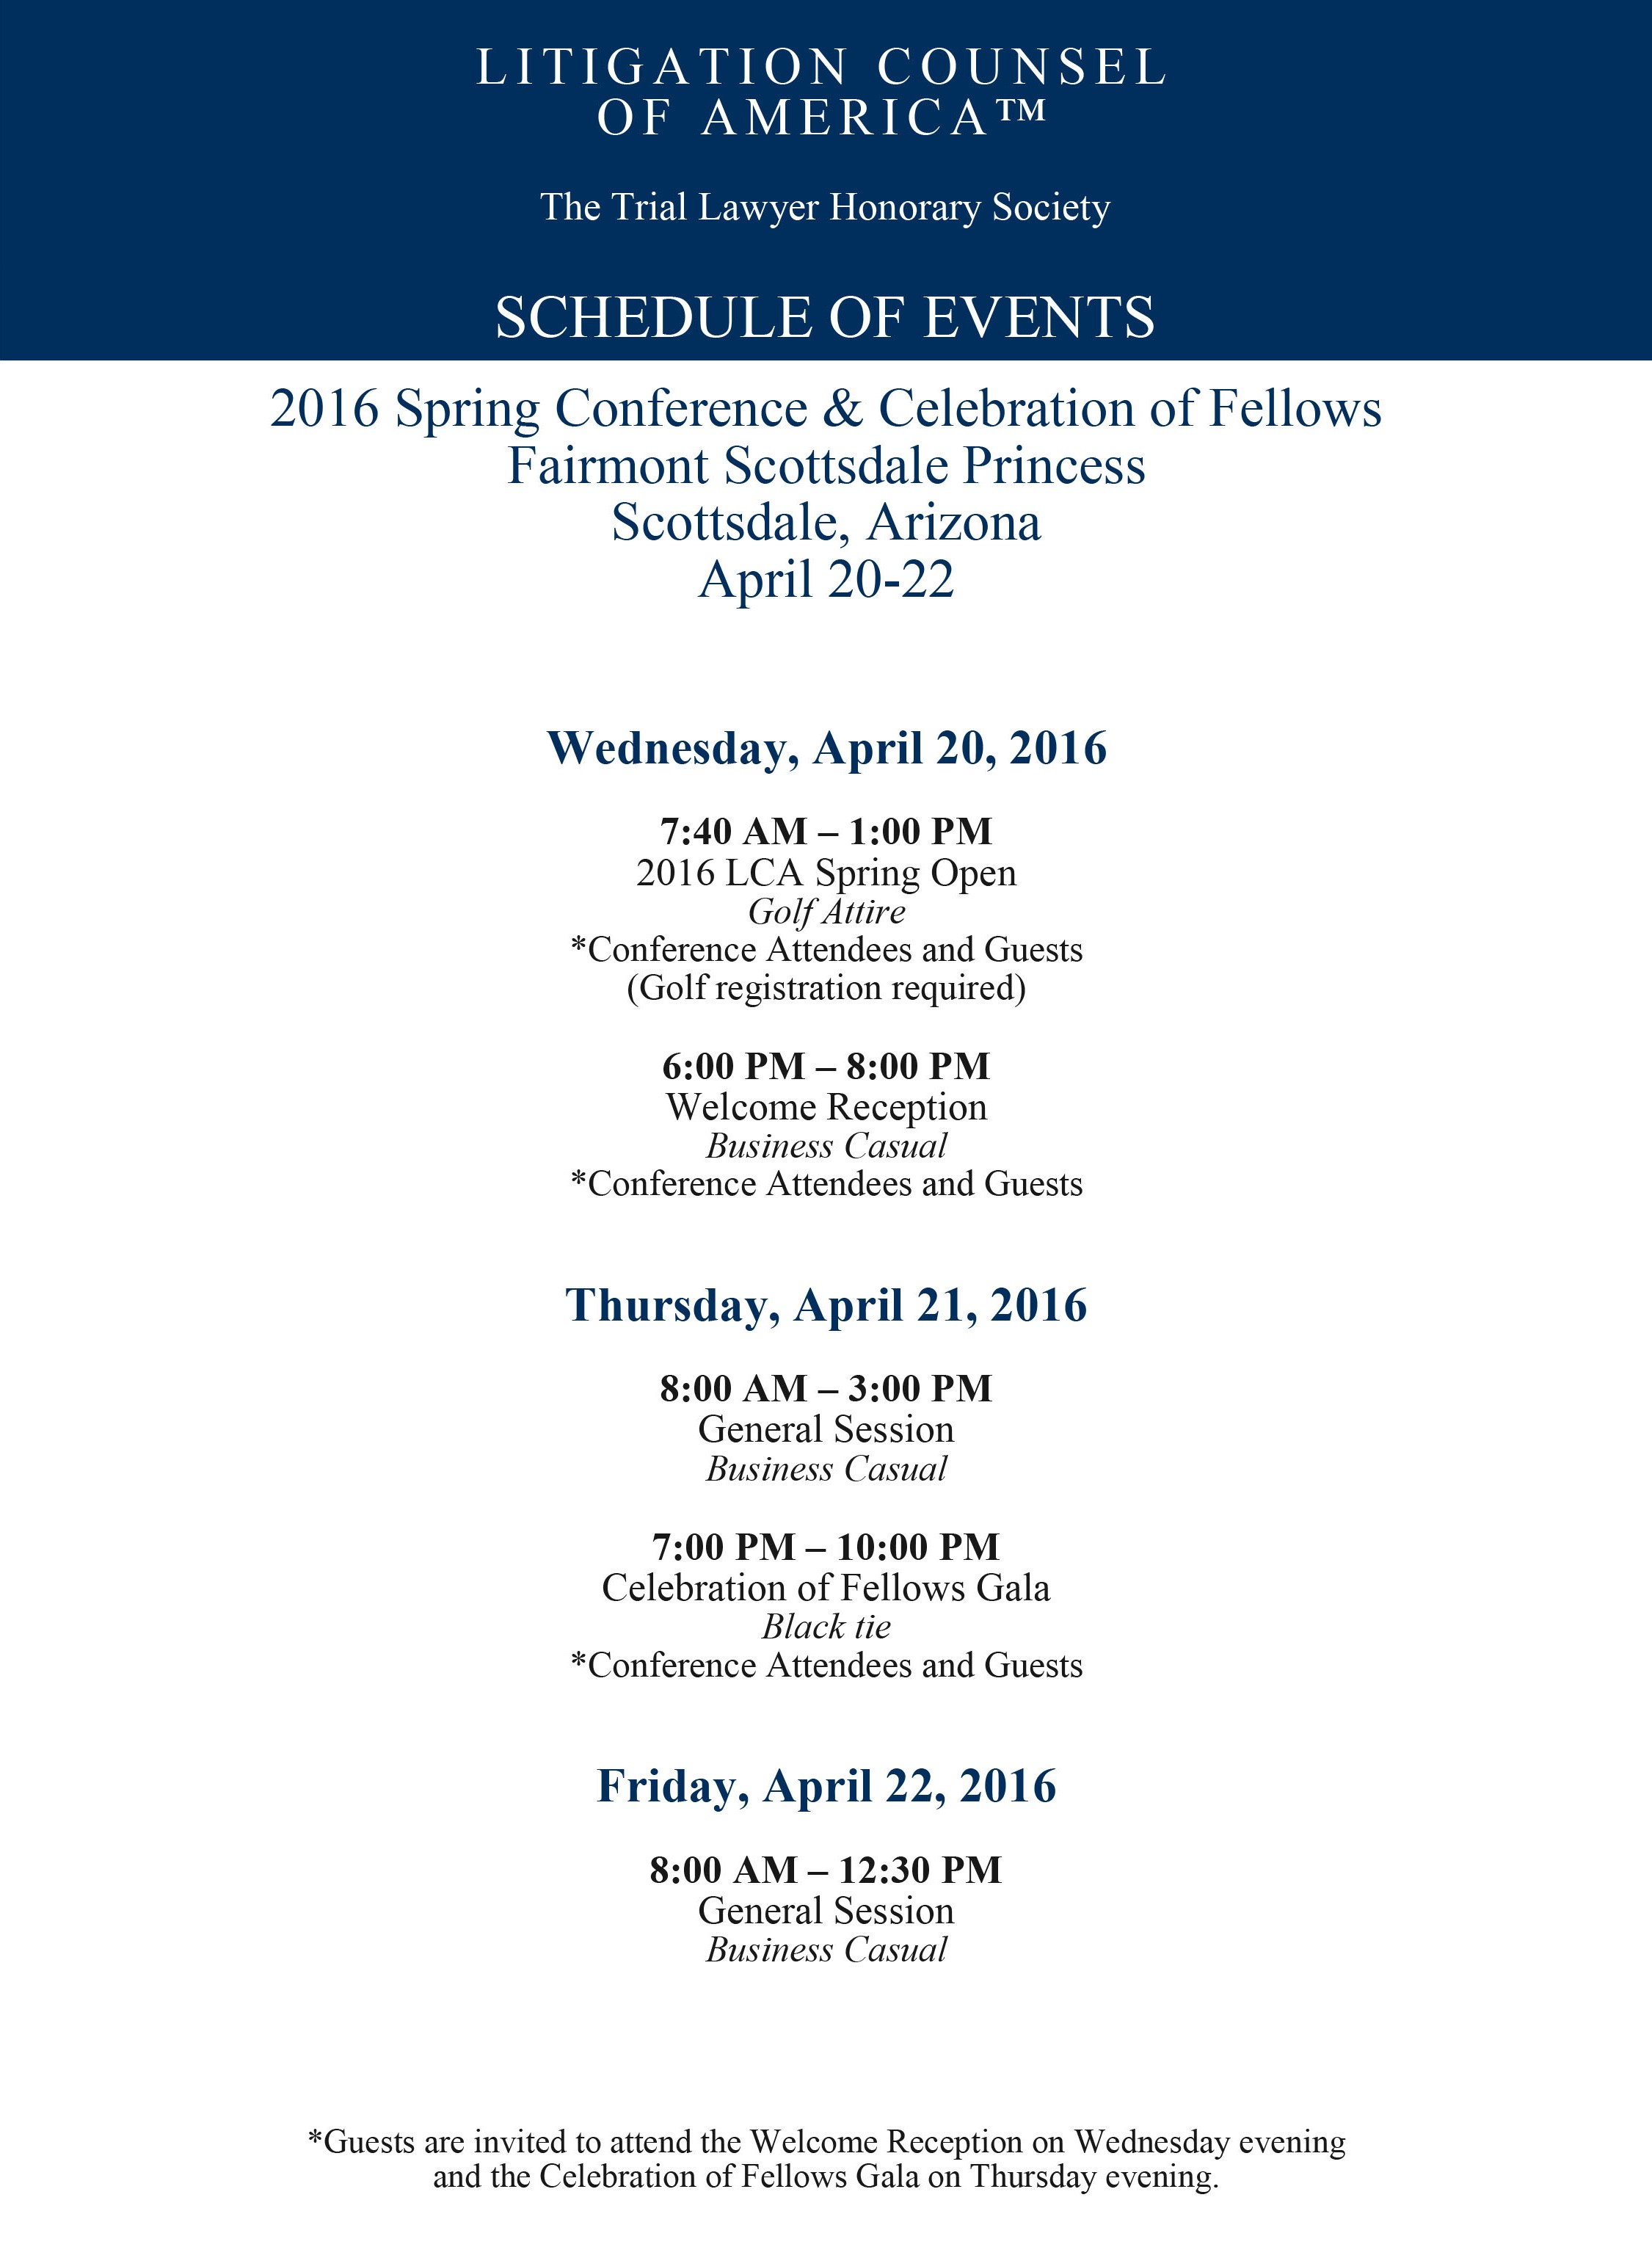 Initial Social Schedule of Events S 2016